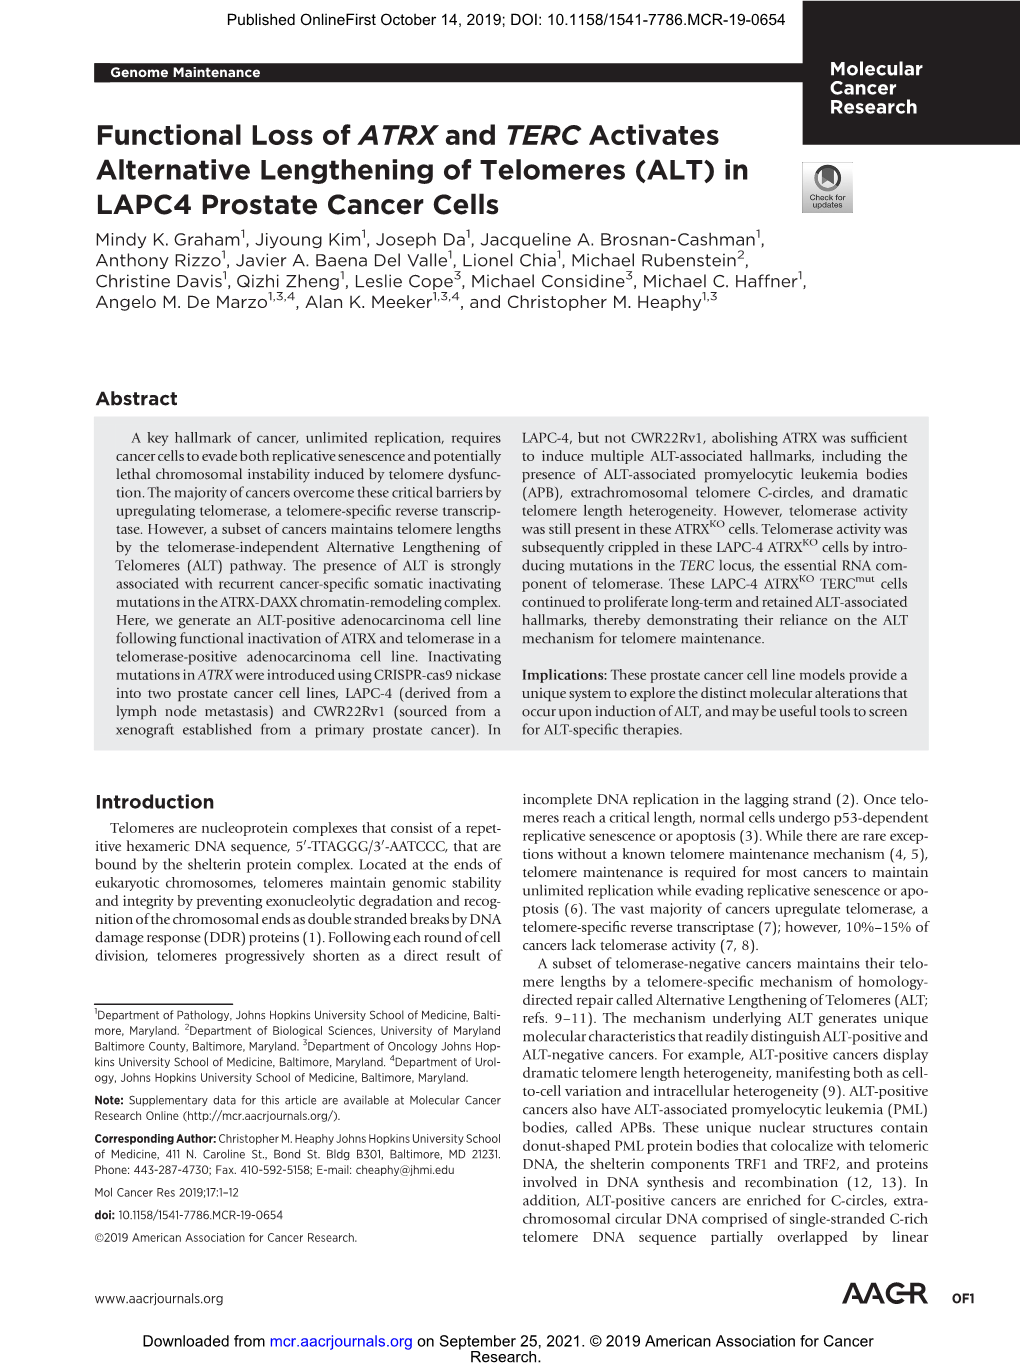 Functional Loss of ATRX and TERC Activates Alternative Lengthening of Telomeres (ALT) in LAPC4 Prostate Cancer Cells Mindy K